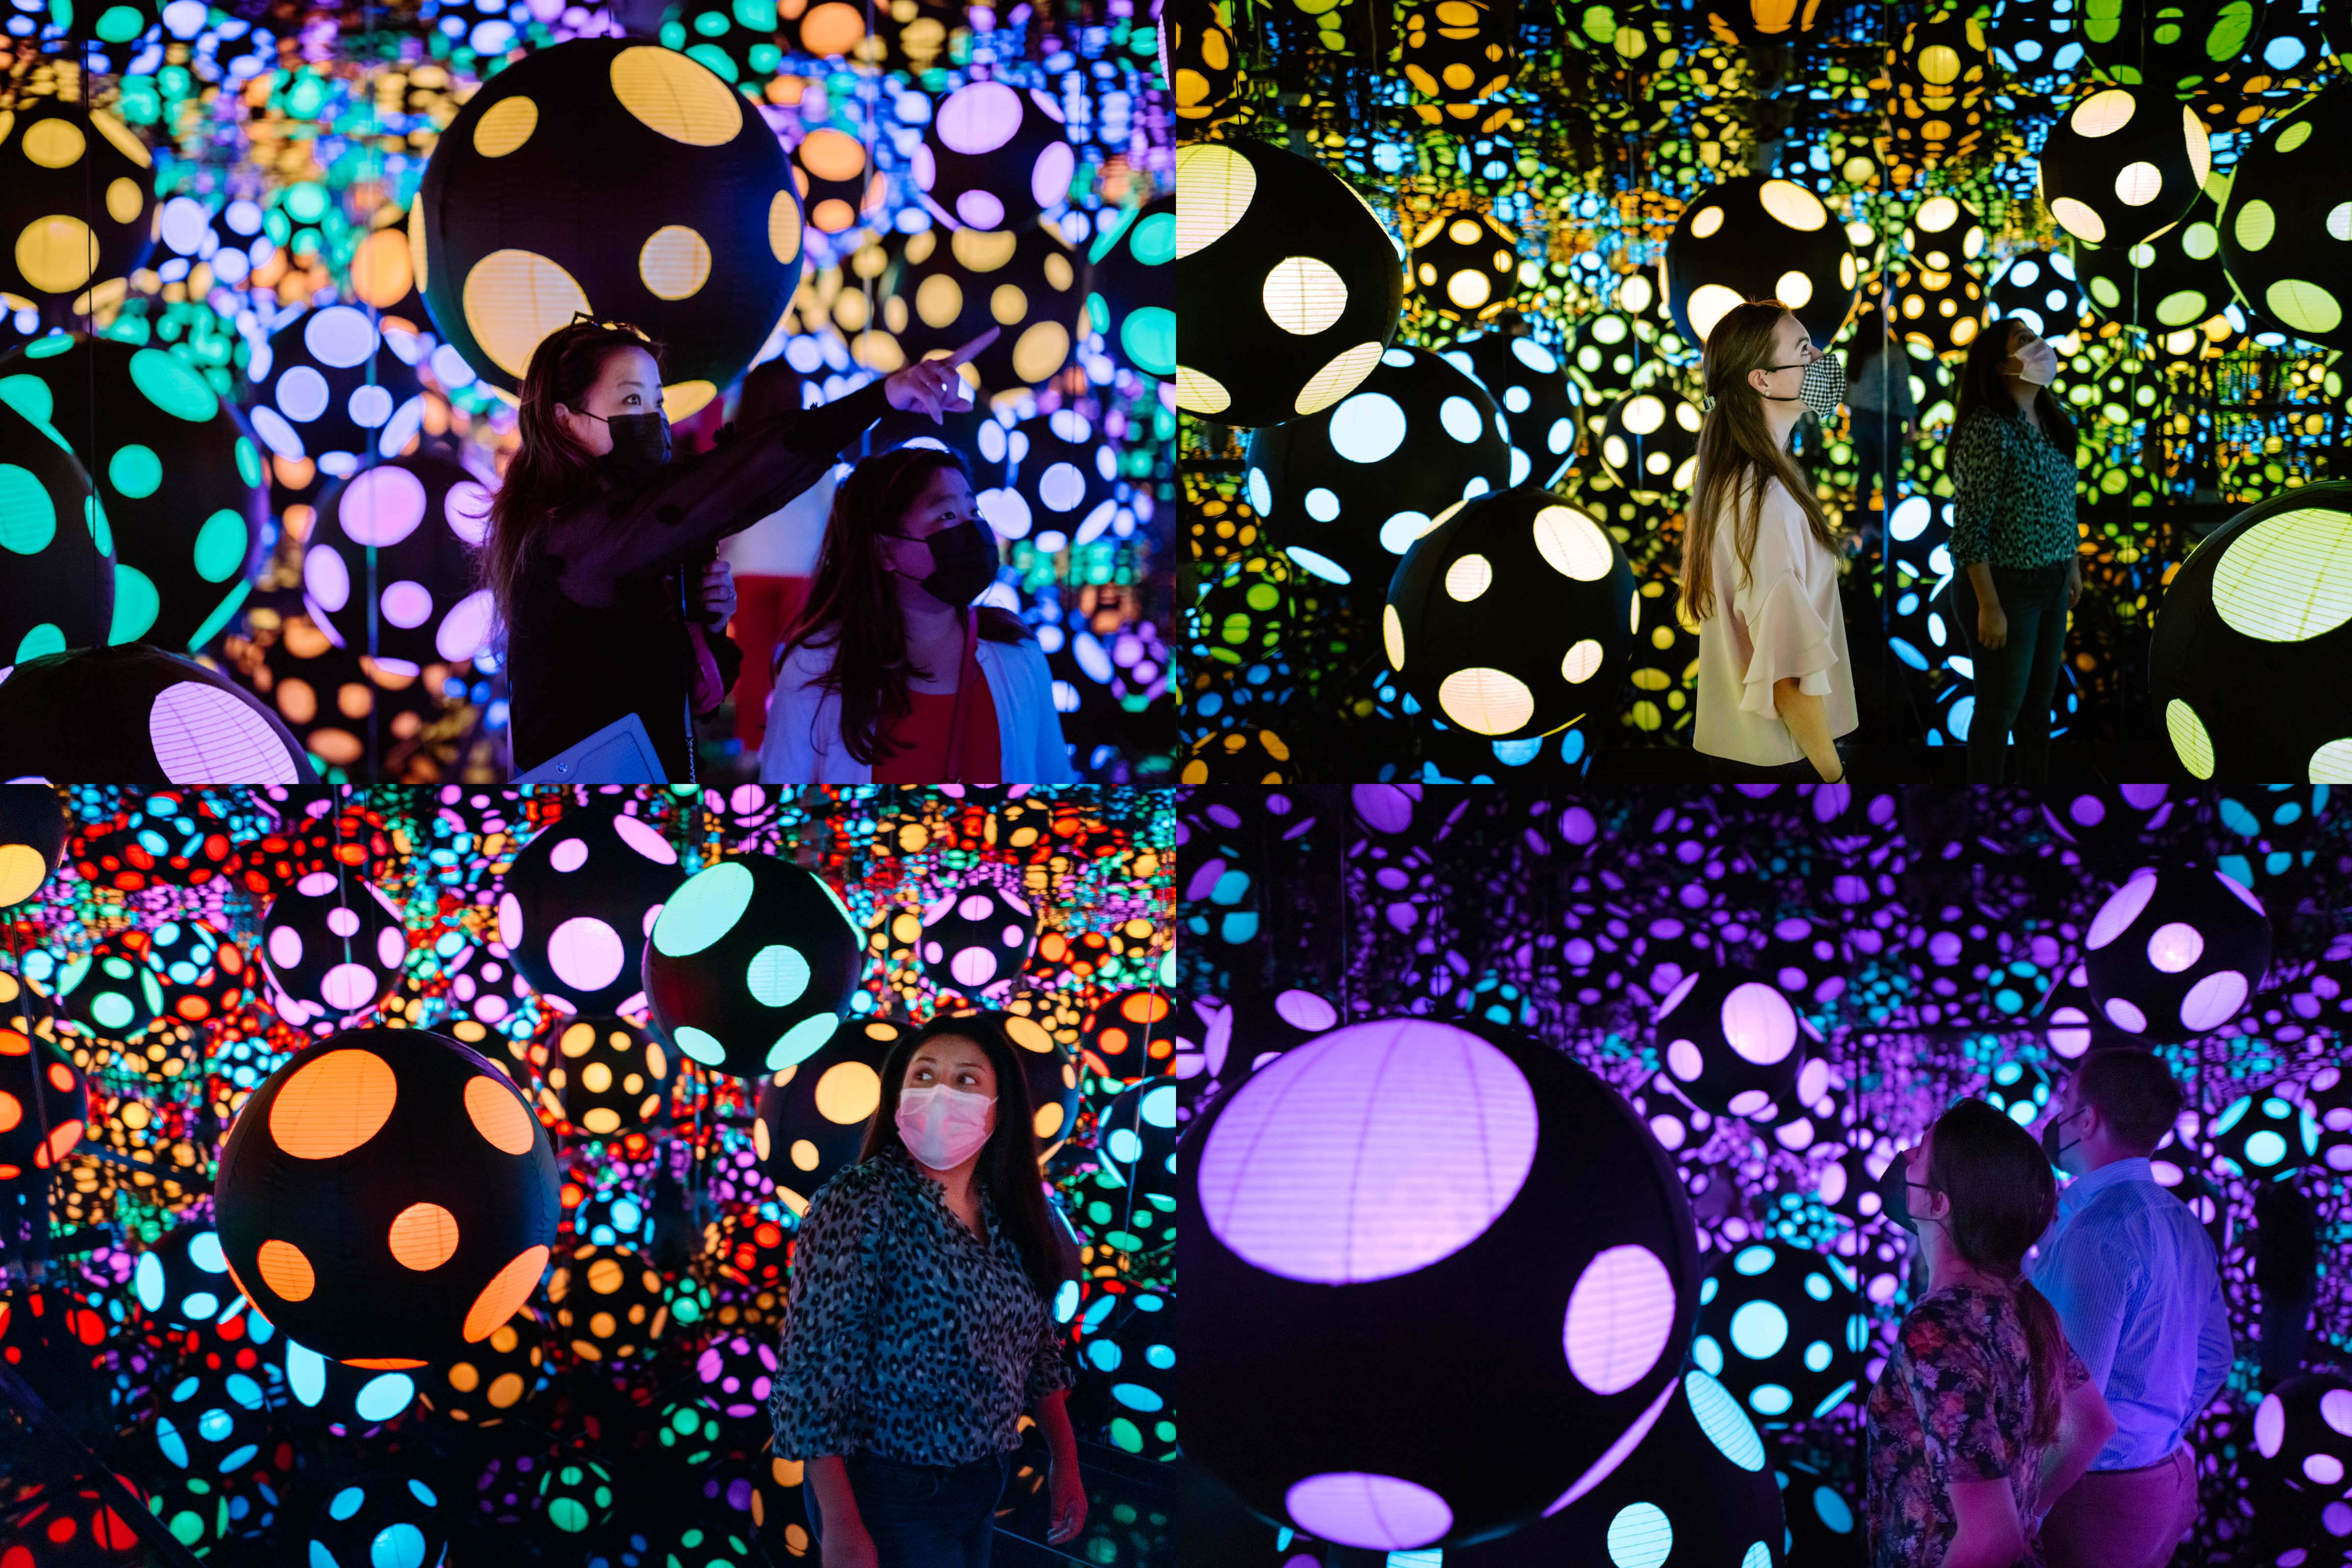 Room with mirrored walls filled with colorful polka-dotted balls